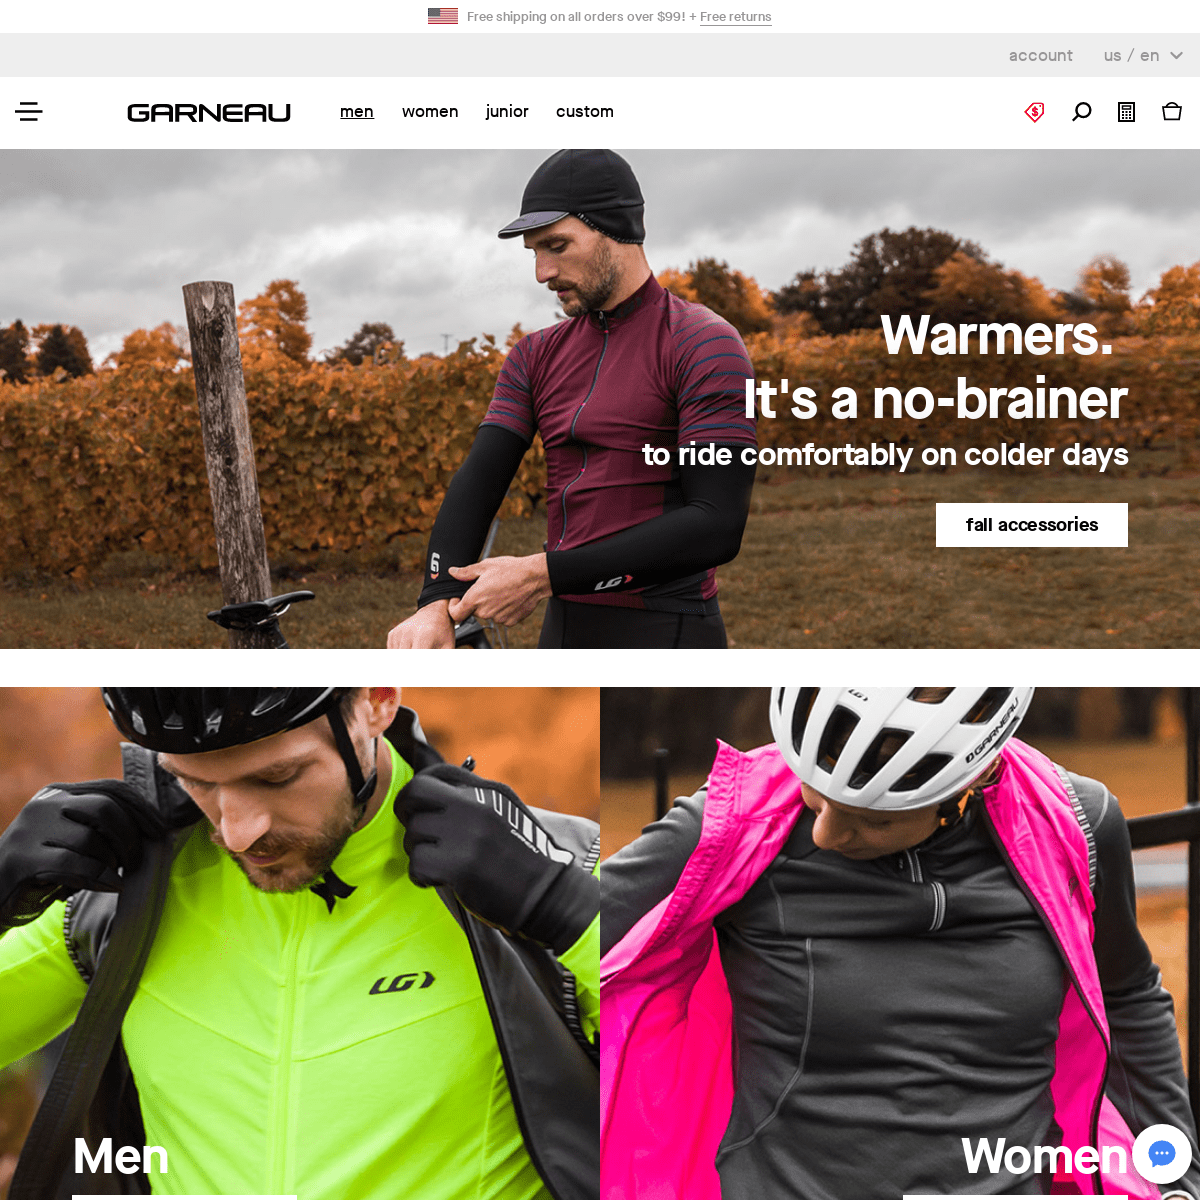 Cycling Clothing, Gear and Bikes for Men, Women and Kid  | Garneau USA